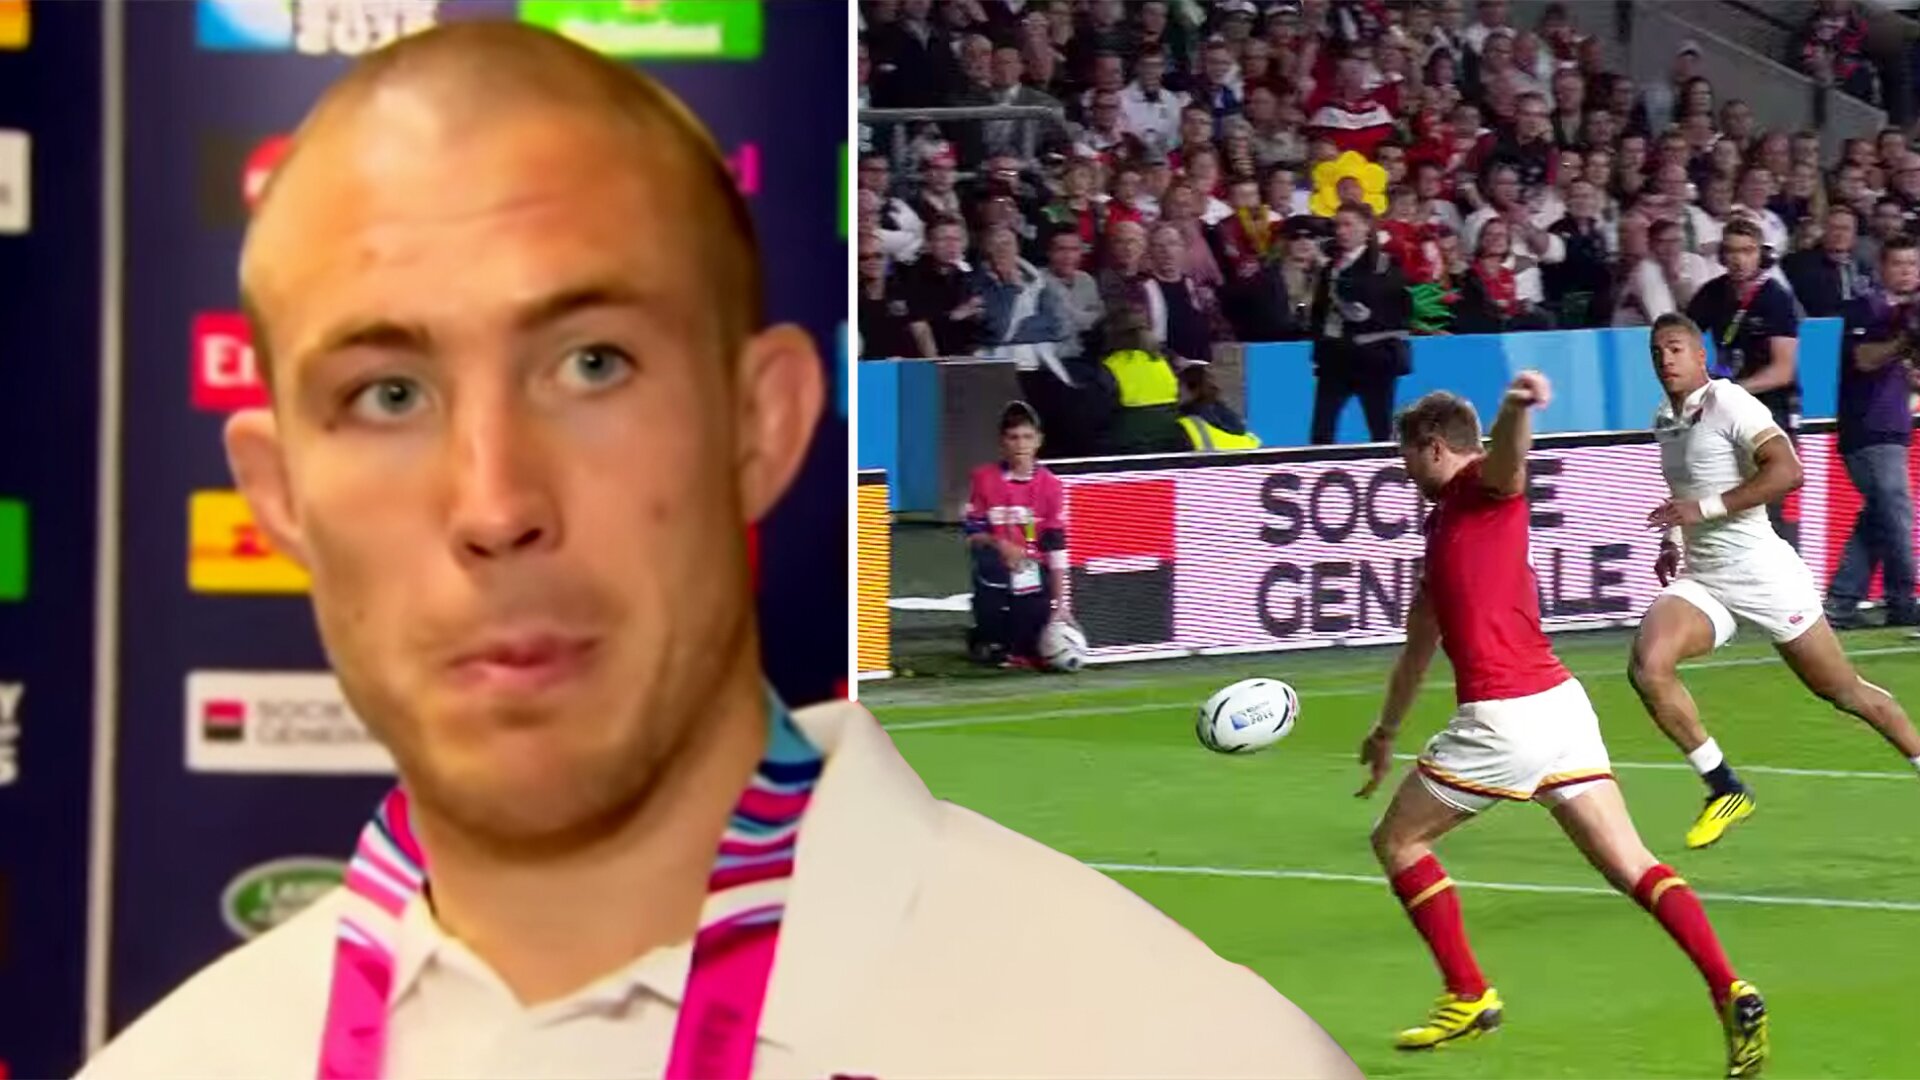 Social media alight as Wales fans reflect on five years since famous Rugby World Cup win